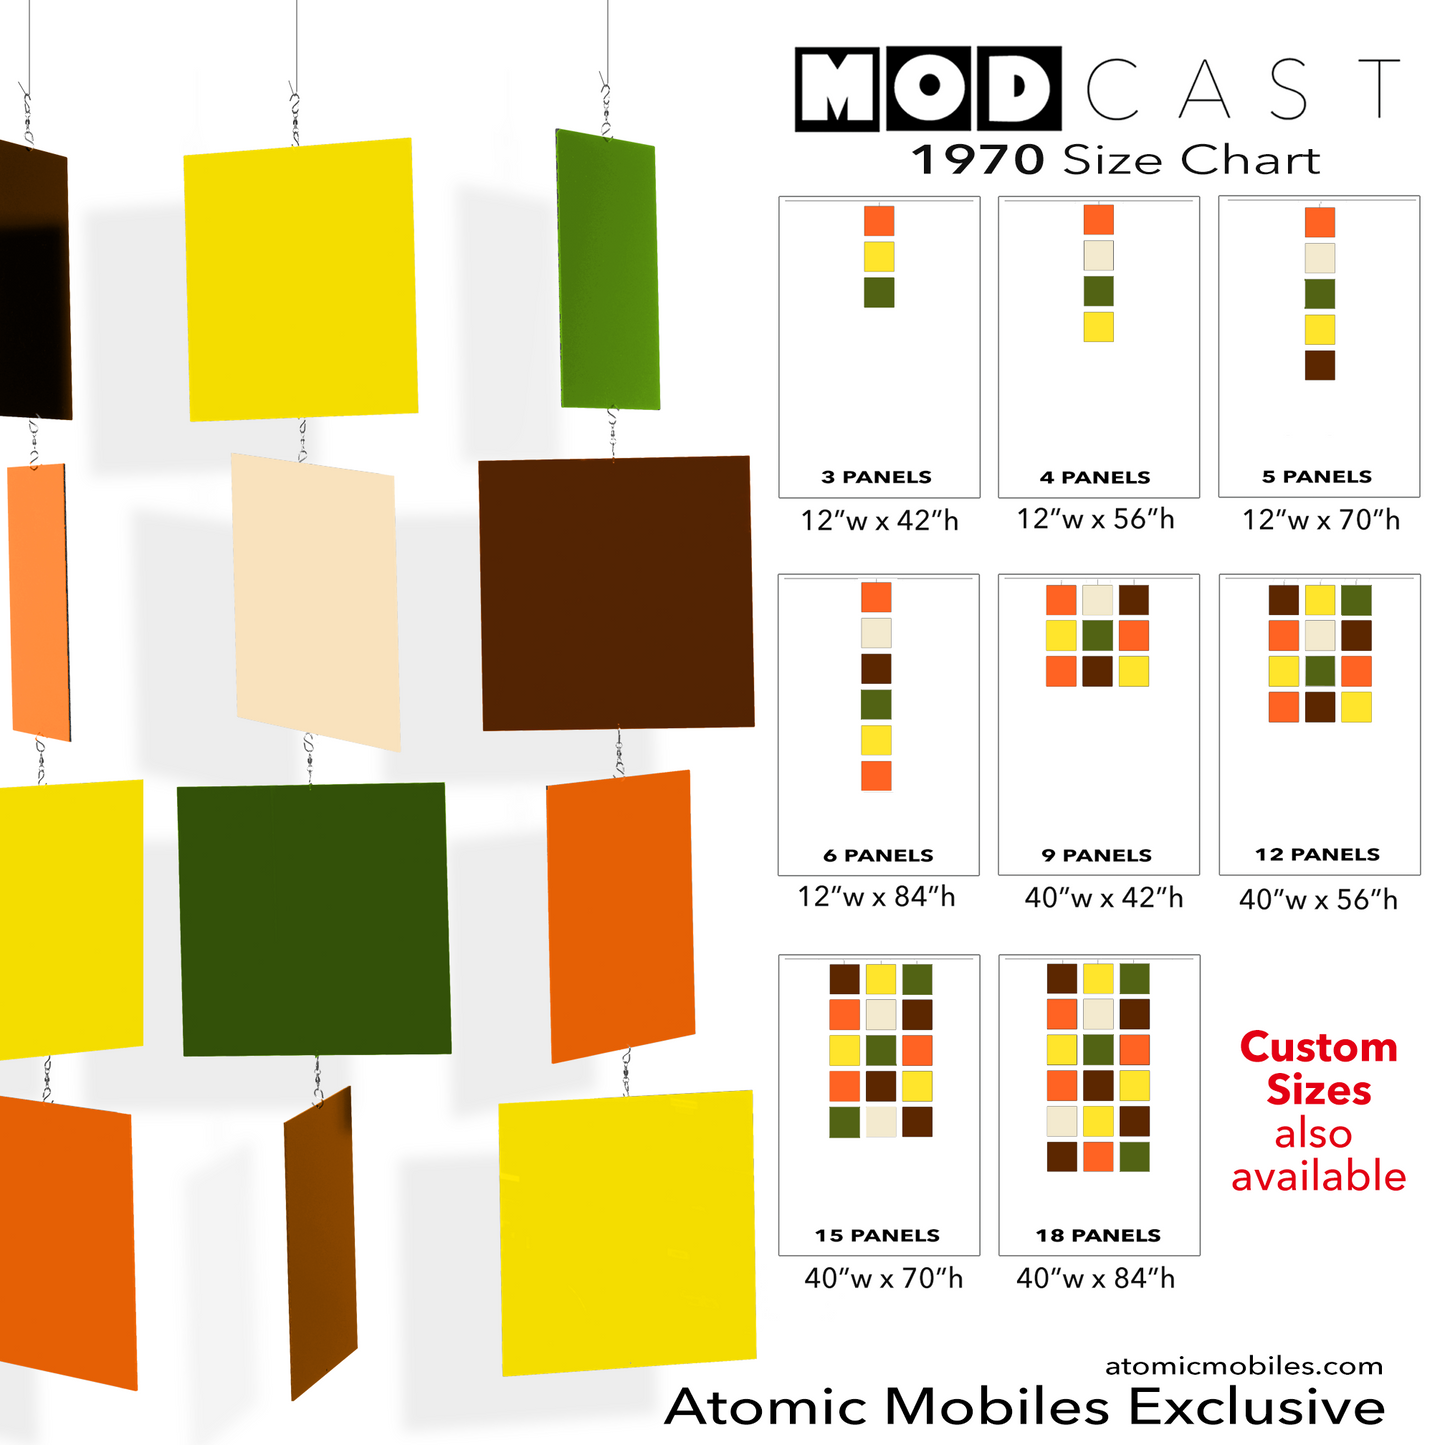 Size Chart for 1970 MODcast Hanging Art Mobiles in Orange, Olive Green, Yellow, Cream, and Brown,  - mid century modern style kinetic art by AtomicMobiles.com